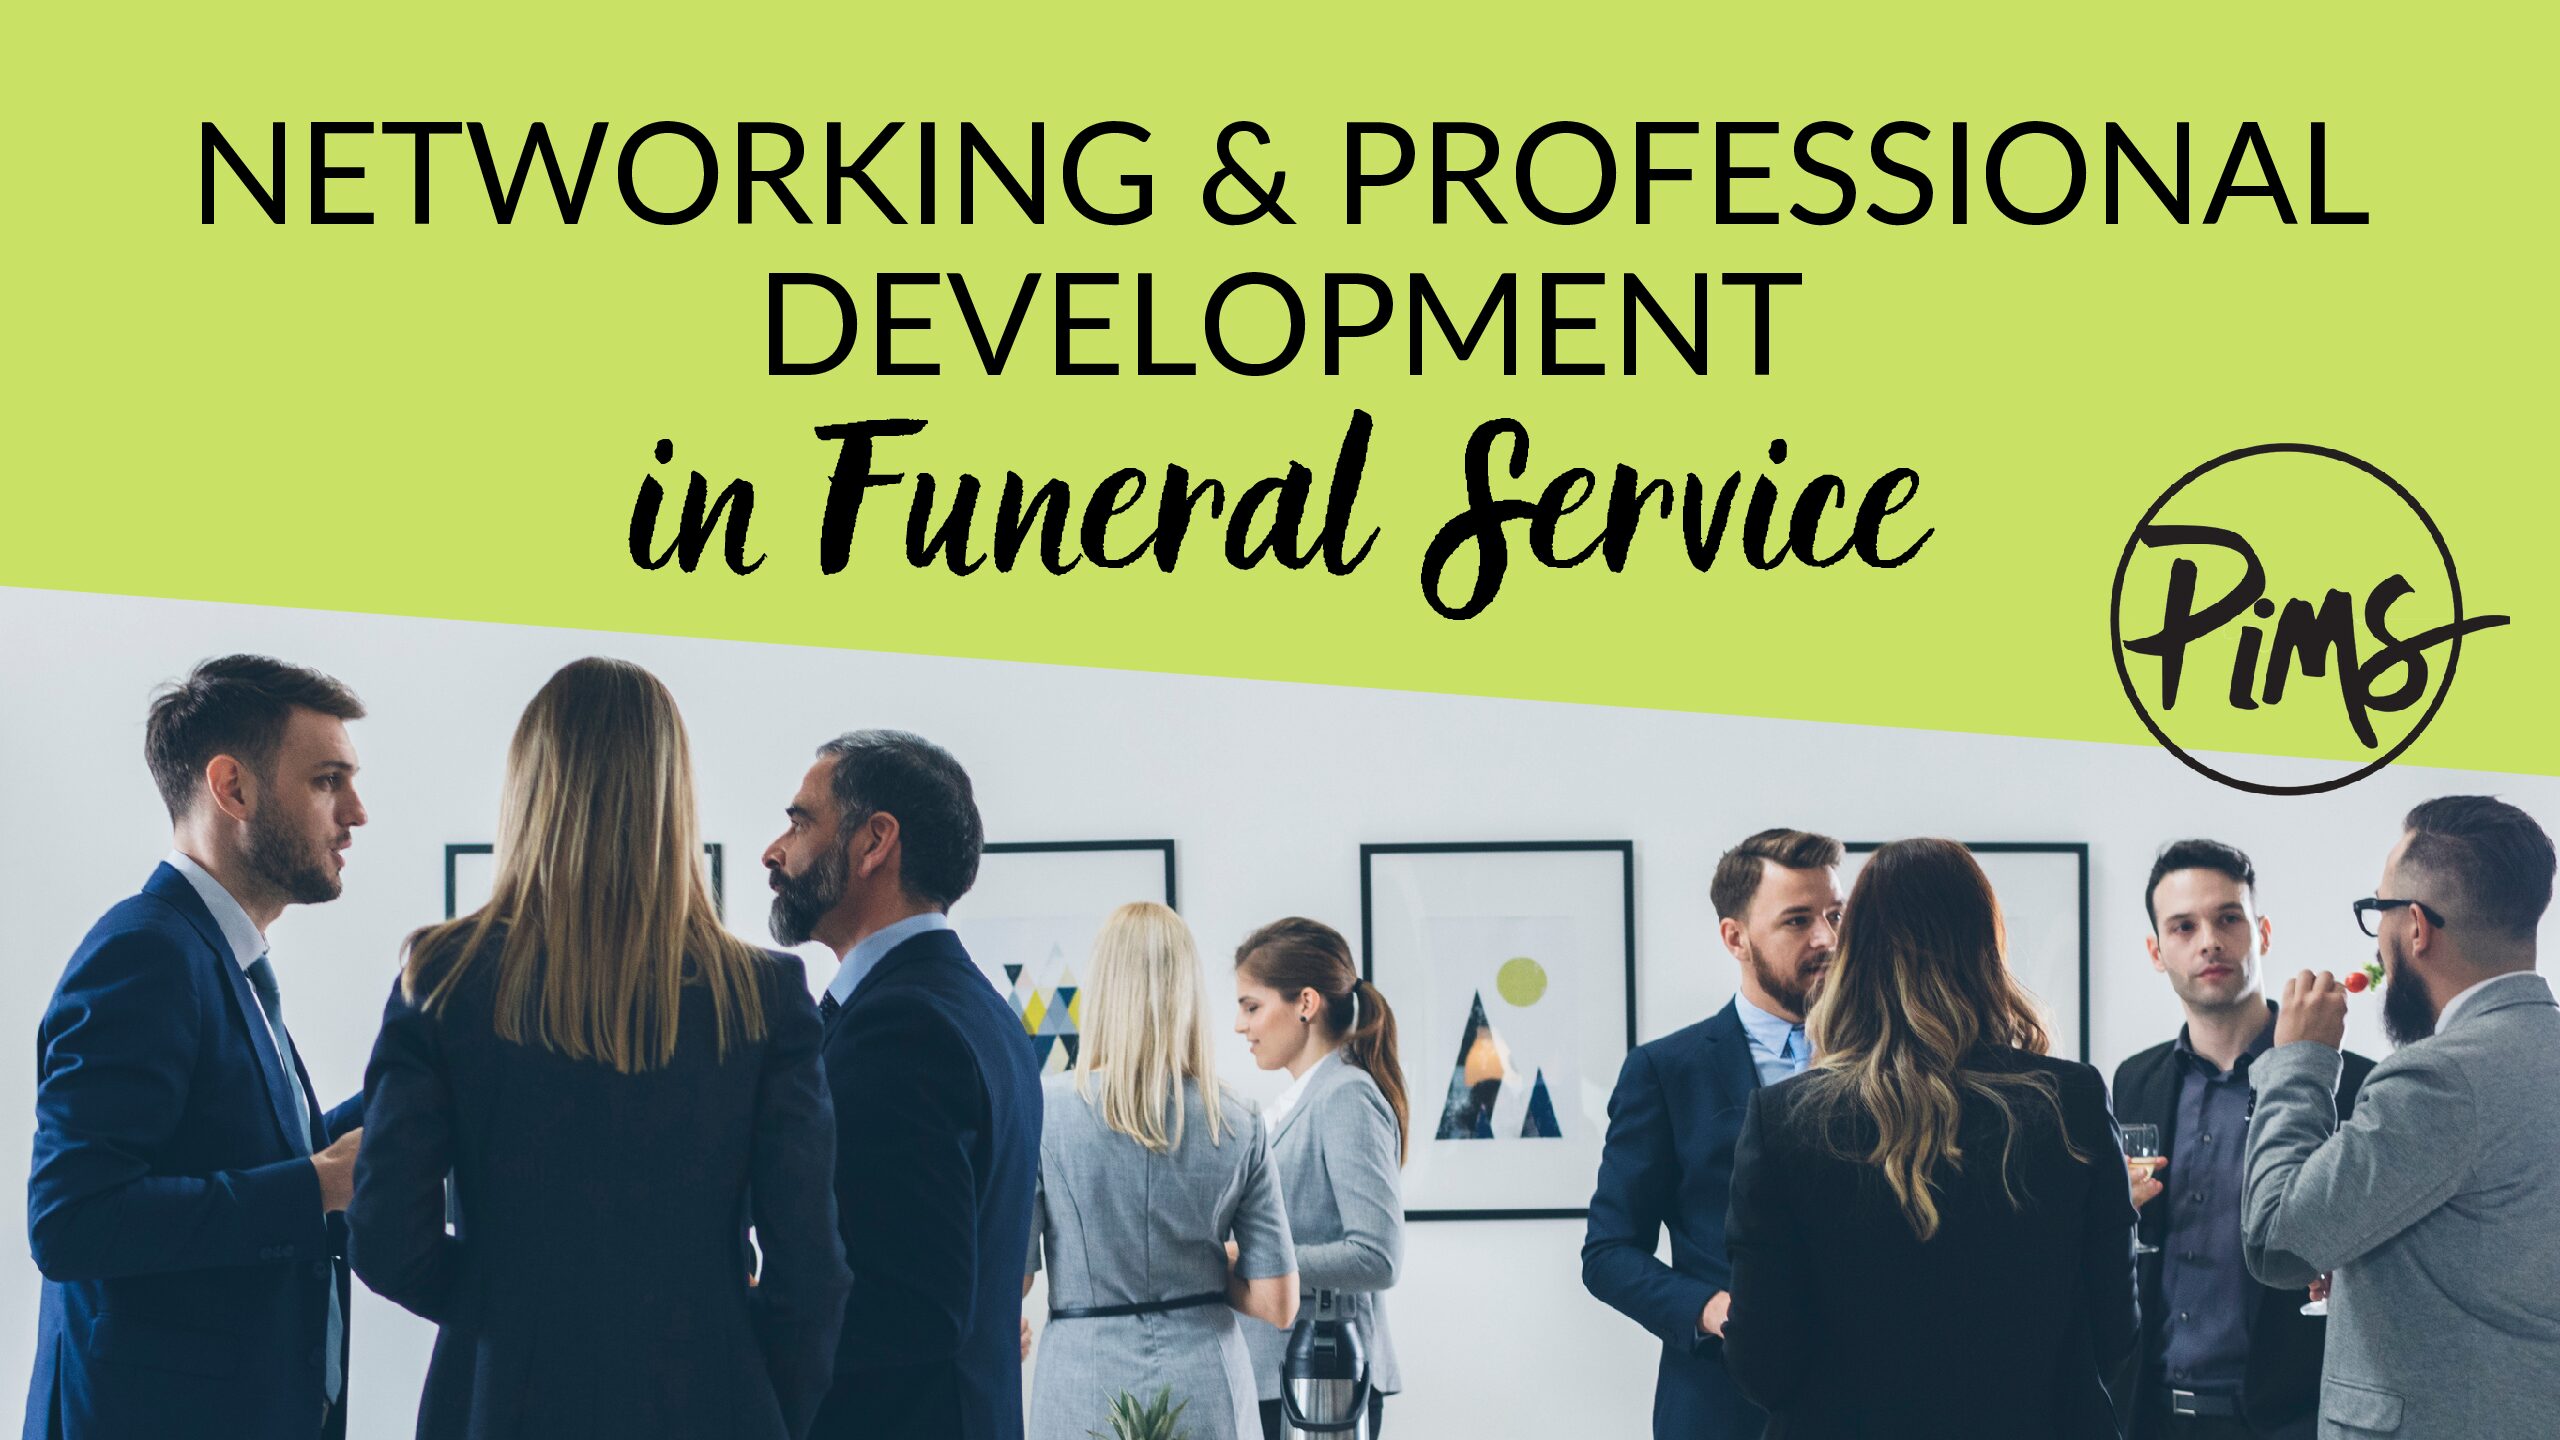 Networking and Professional Development in Funeral Service